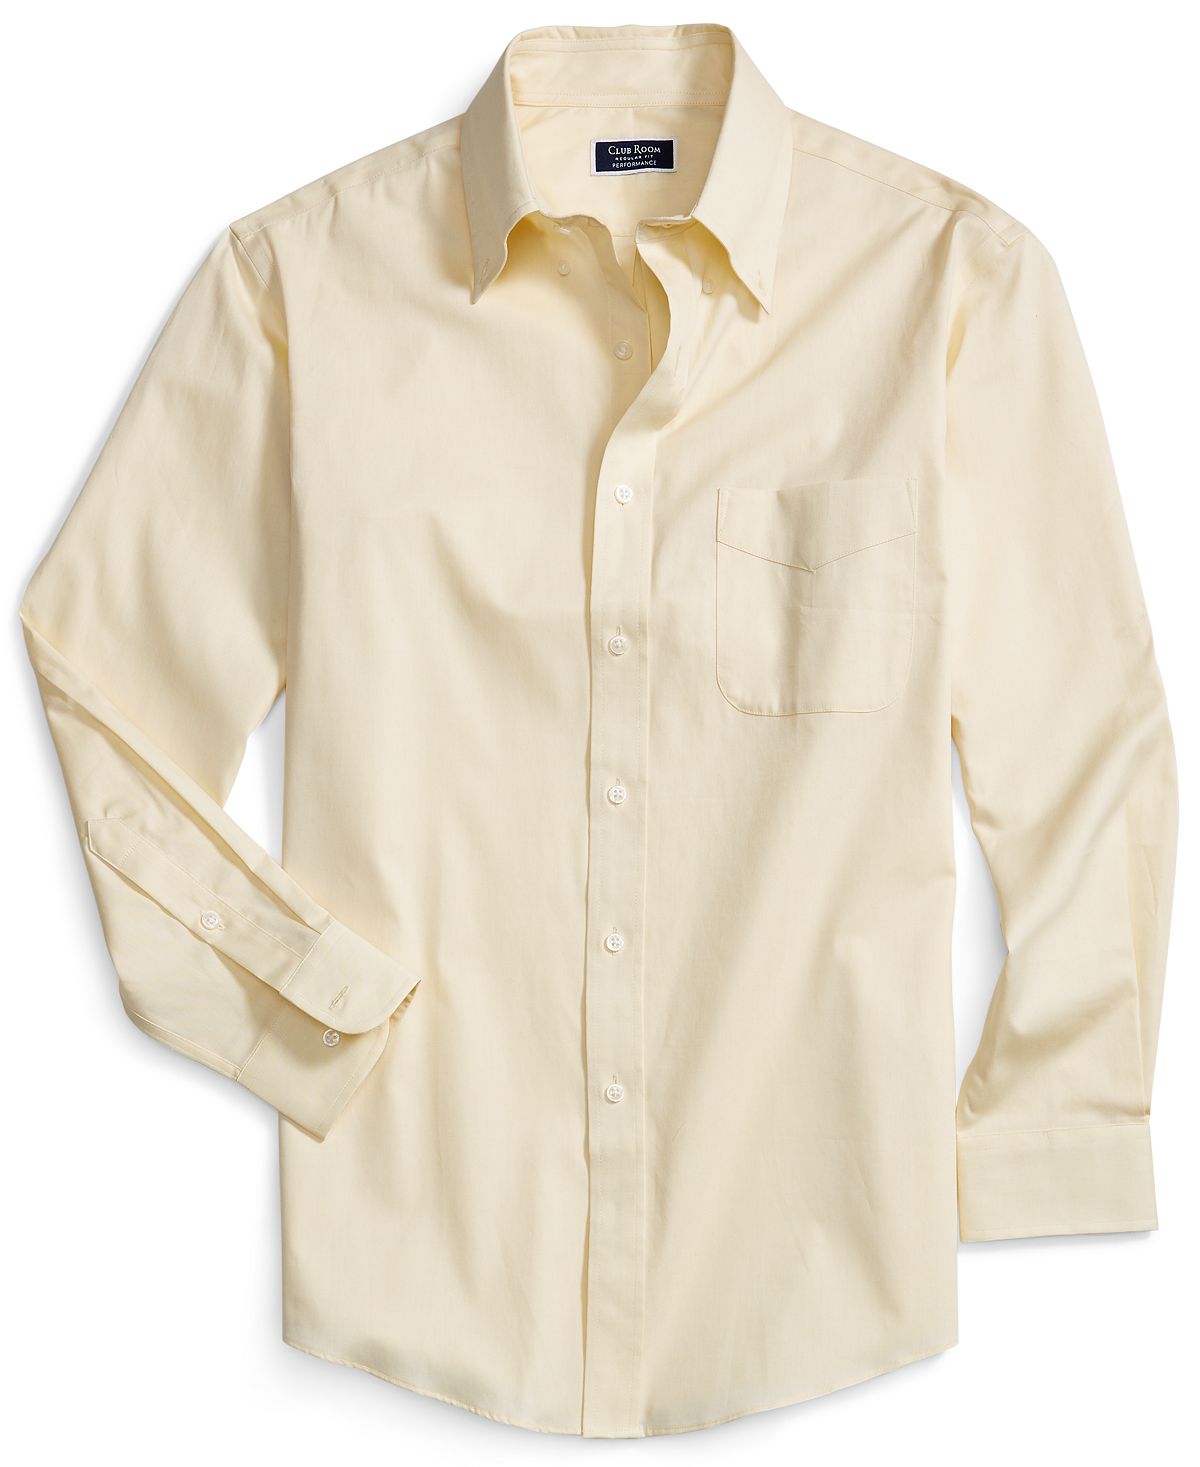 Club Room Classic/regular-fit Performance Stretch Yarn-dyed Pinpoint Dress Shirt Yellow